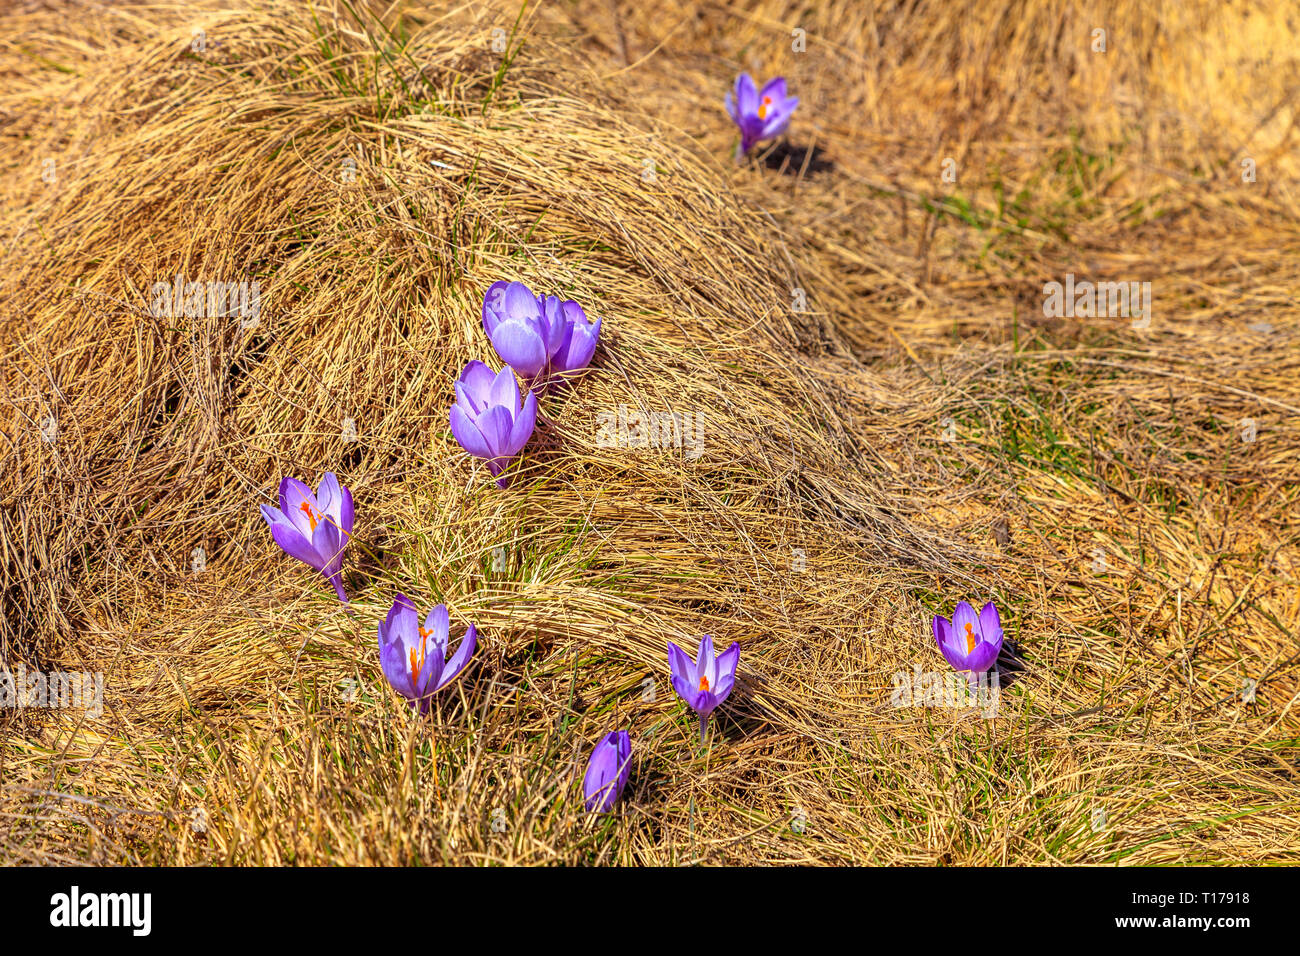 Crocus flower sprouting in the grass in the Campo Imperatore plateau Stock Photo